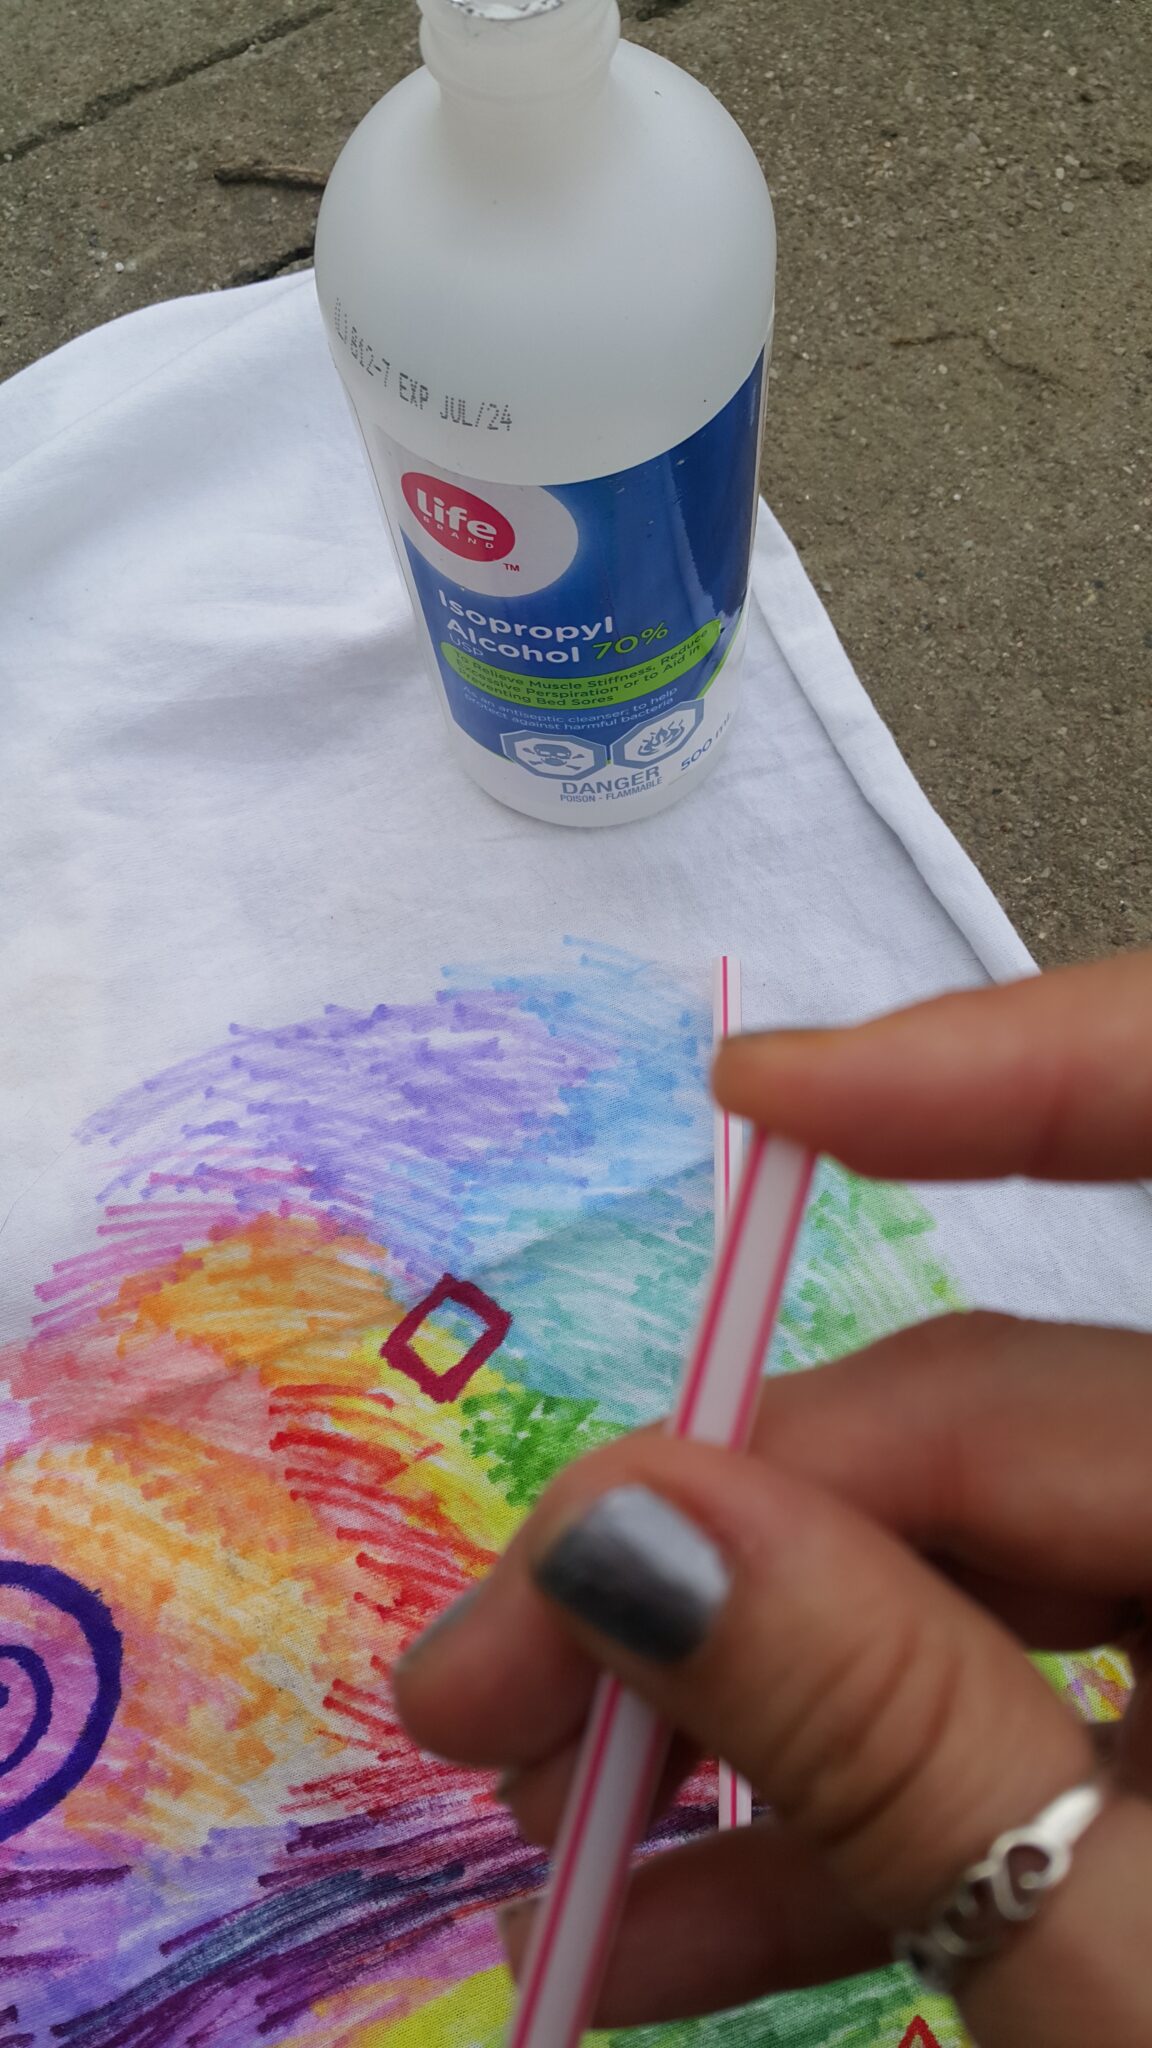 Tie-Dye Effect Painting with Markers